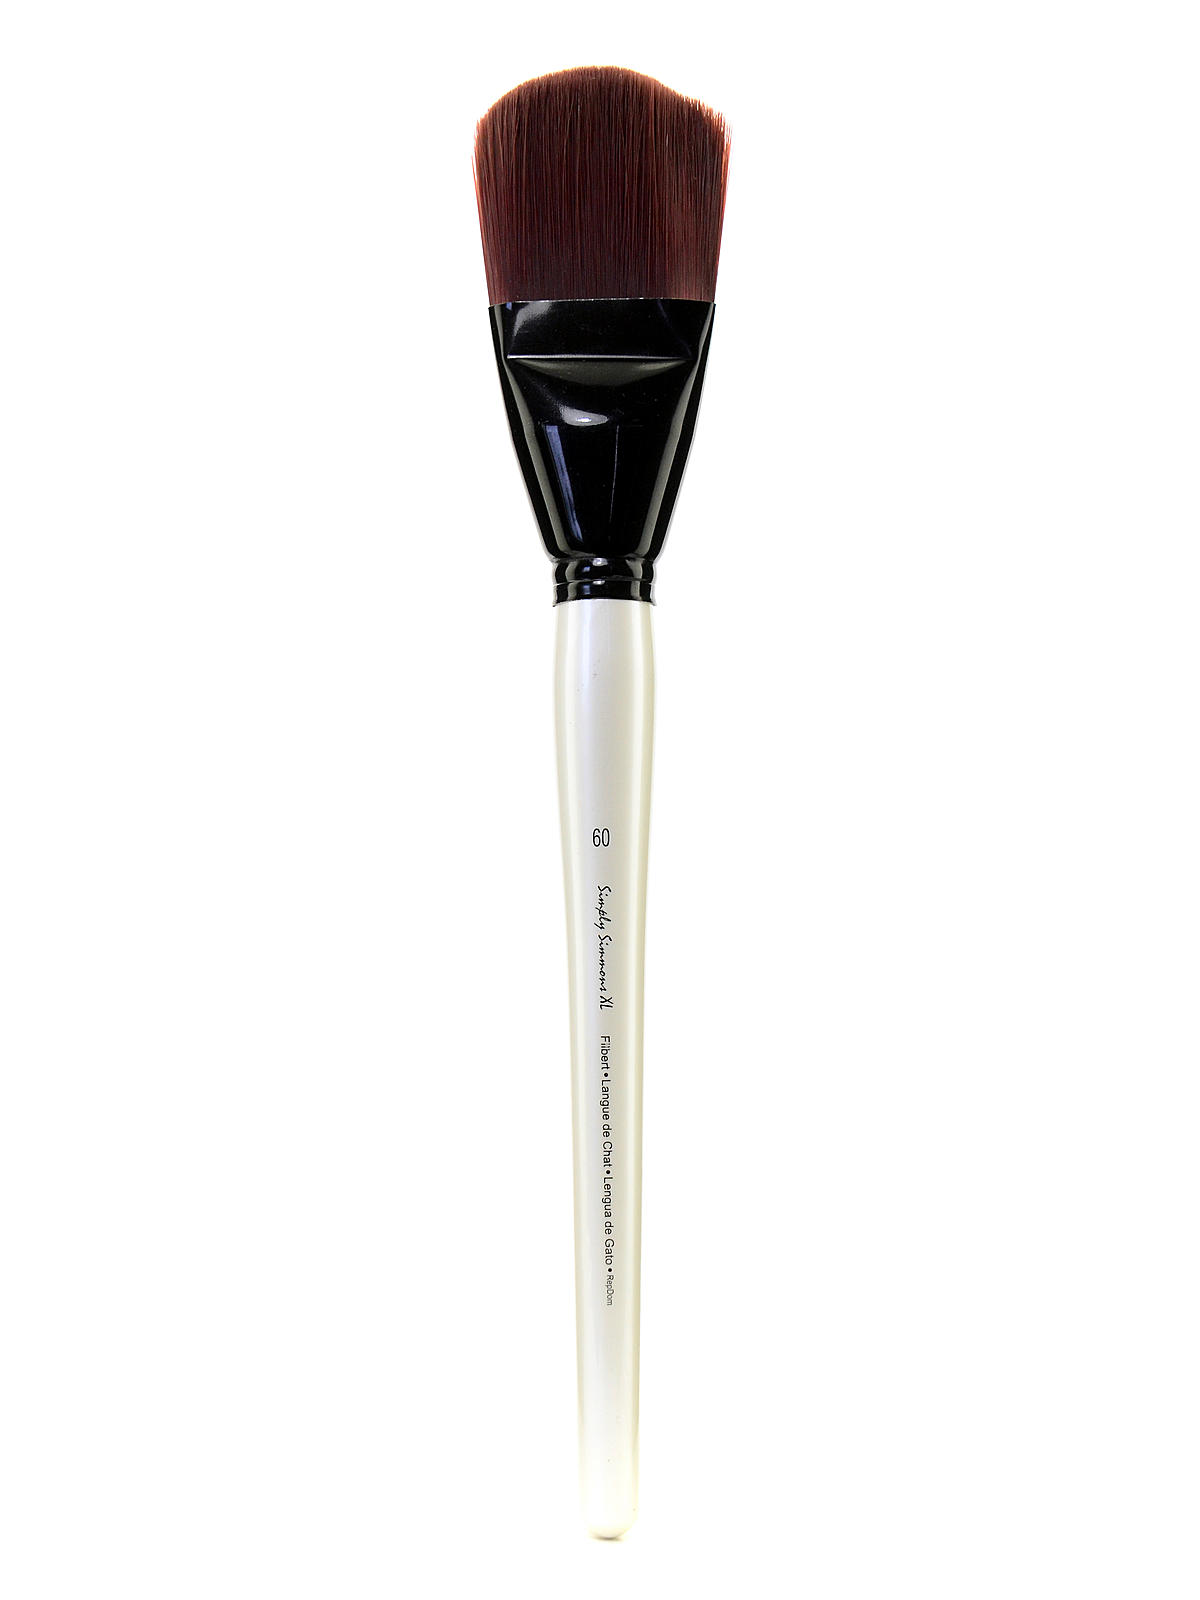 Daler-Rowney Simply Simmons XL Brushes